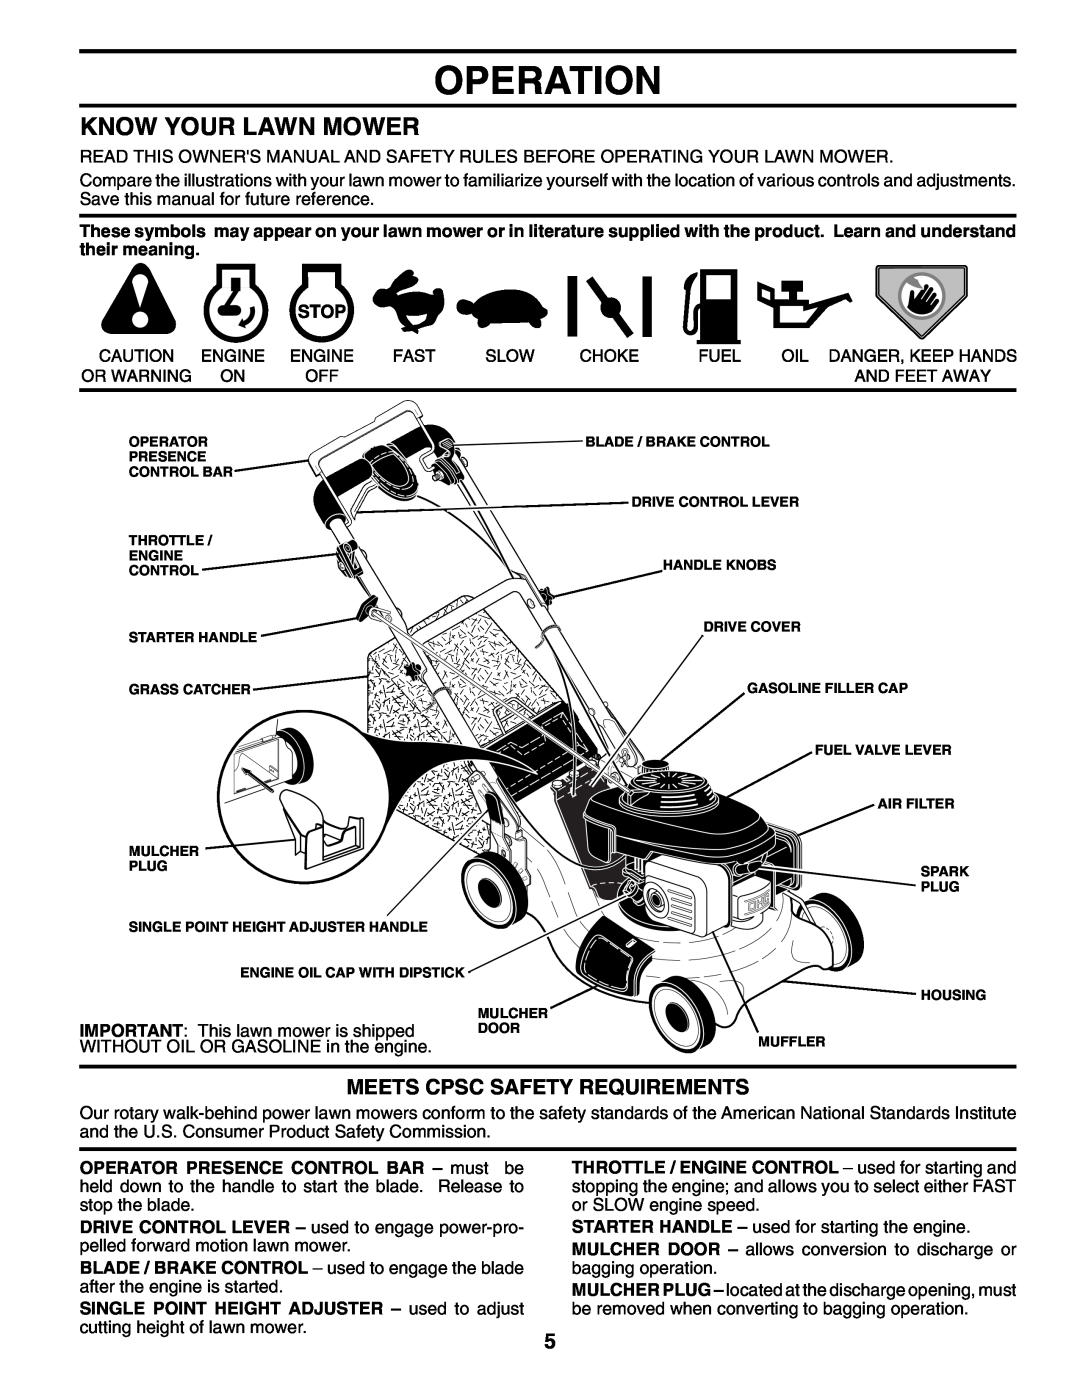 Husqvarna 5521BBC owner manual Operation, Know Your Lawn Mower, Meets Cpsc Safety Requirements 